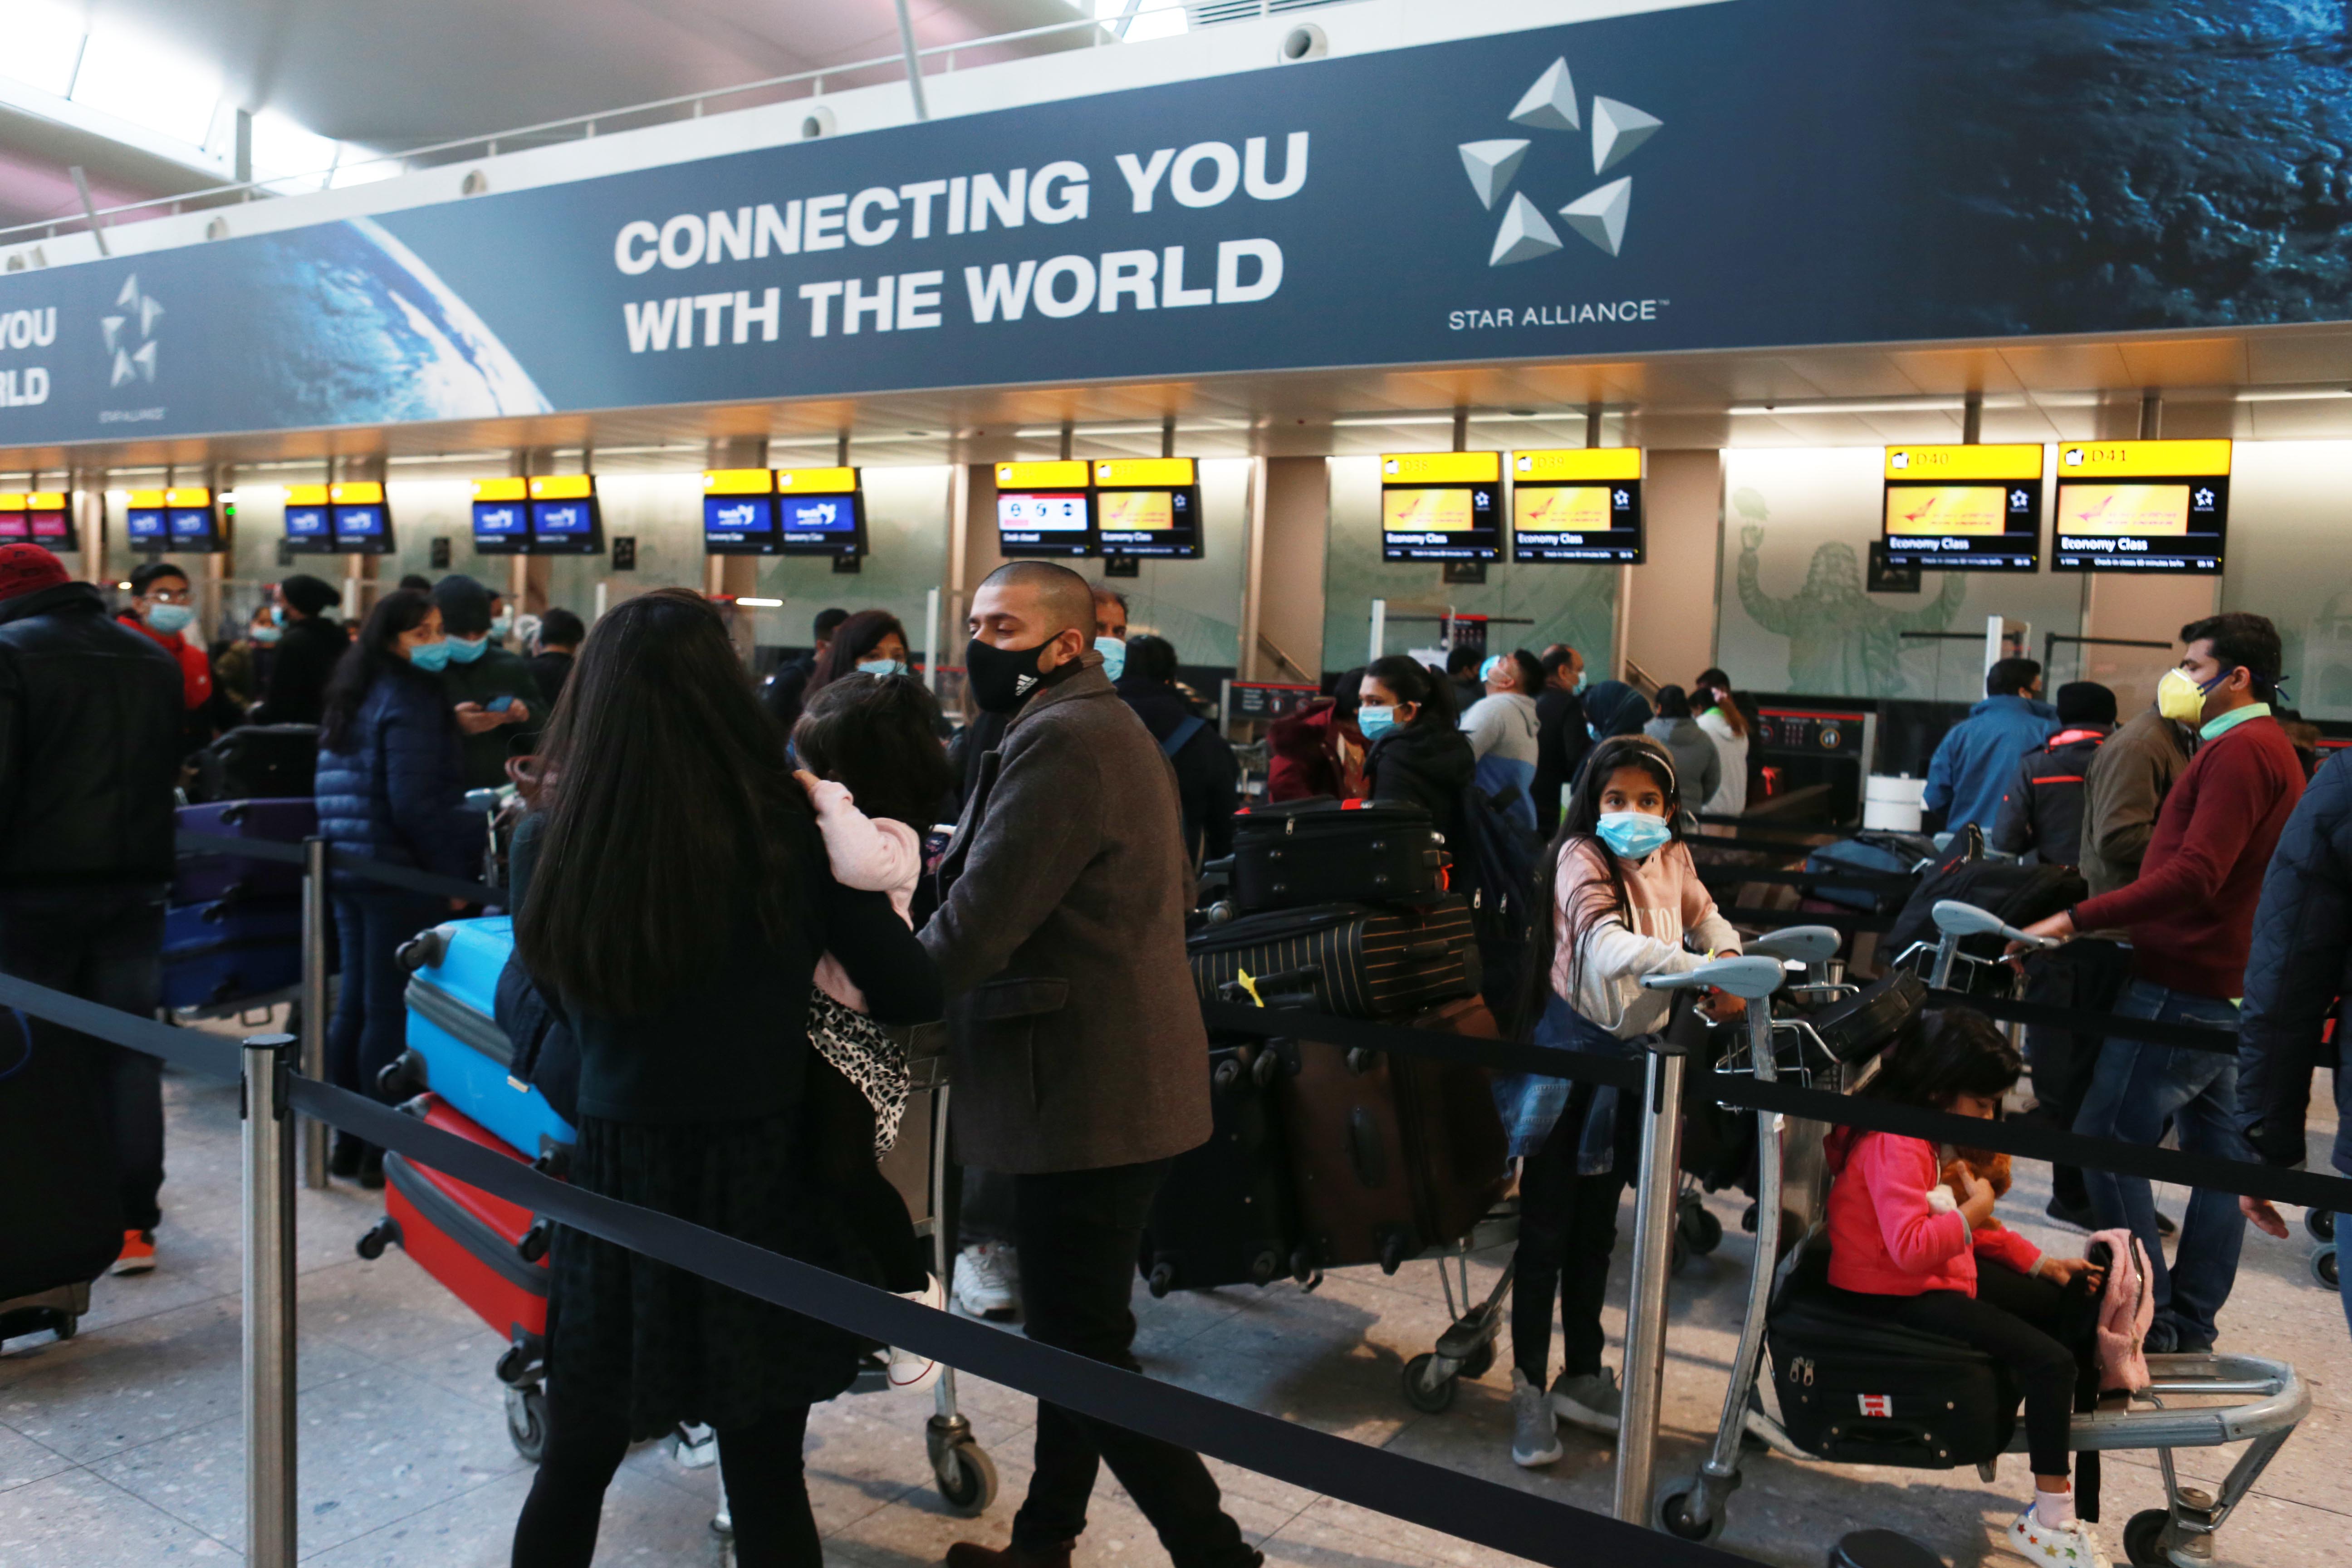 Connecting us with the world is precisely Heathrow’s problem